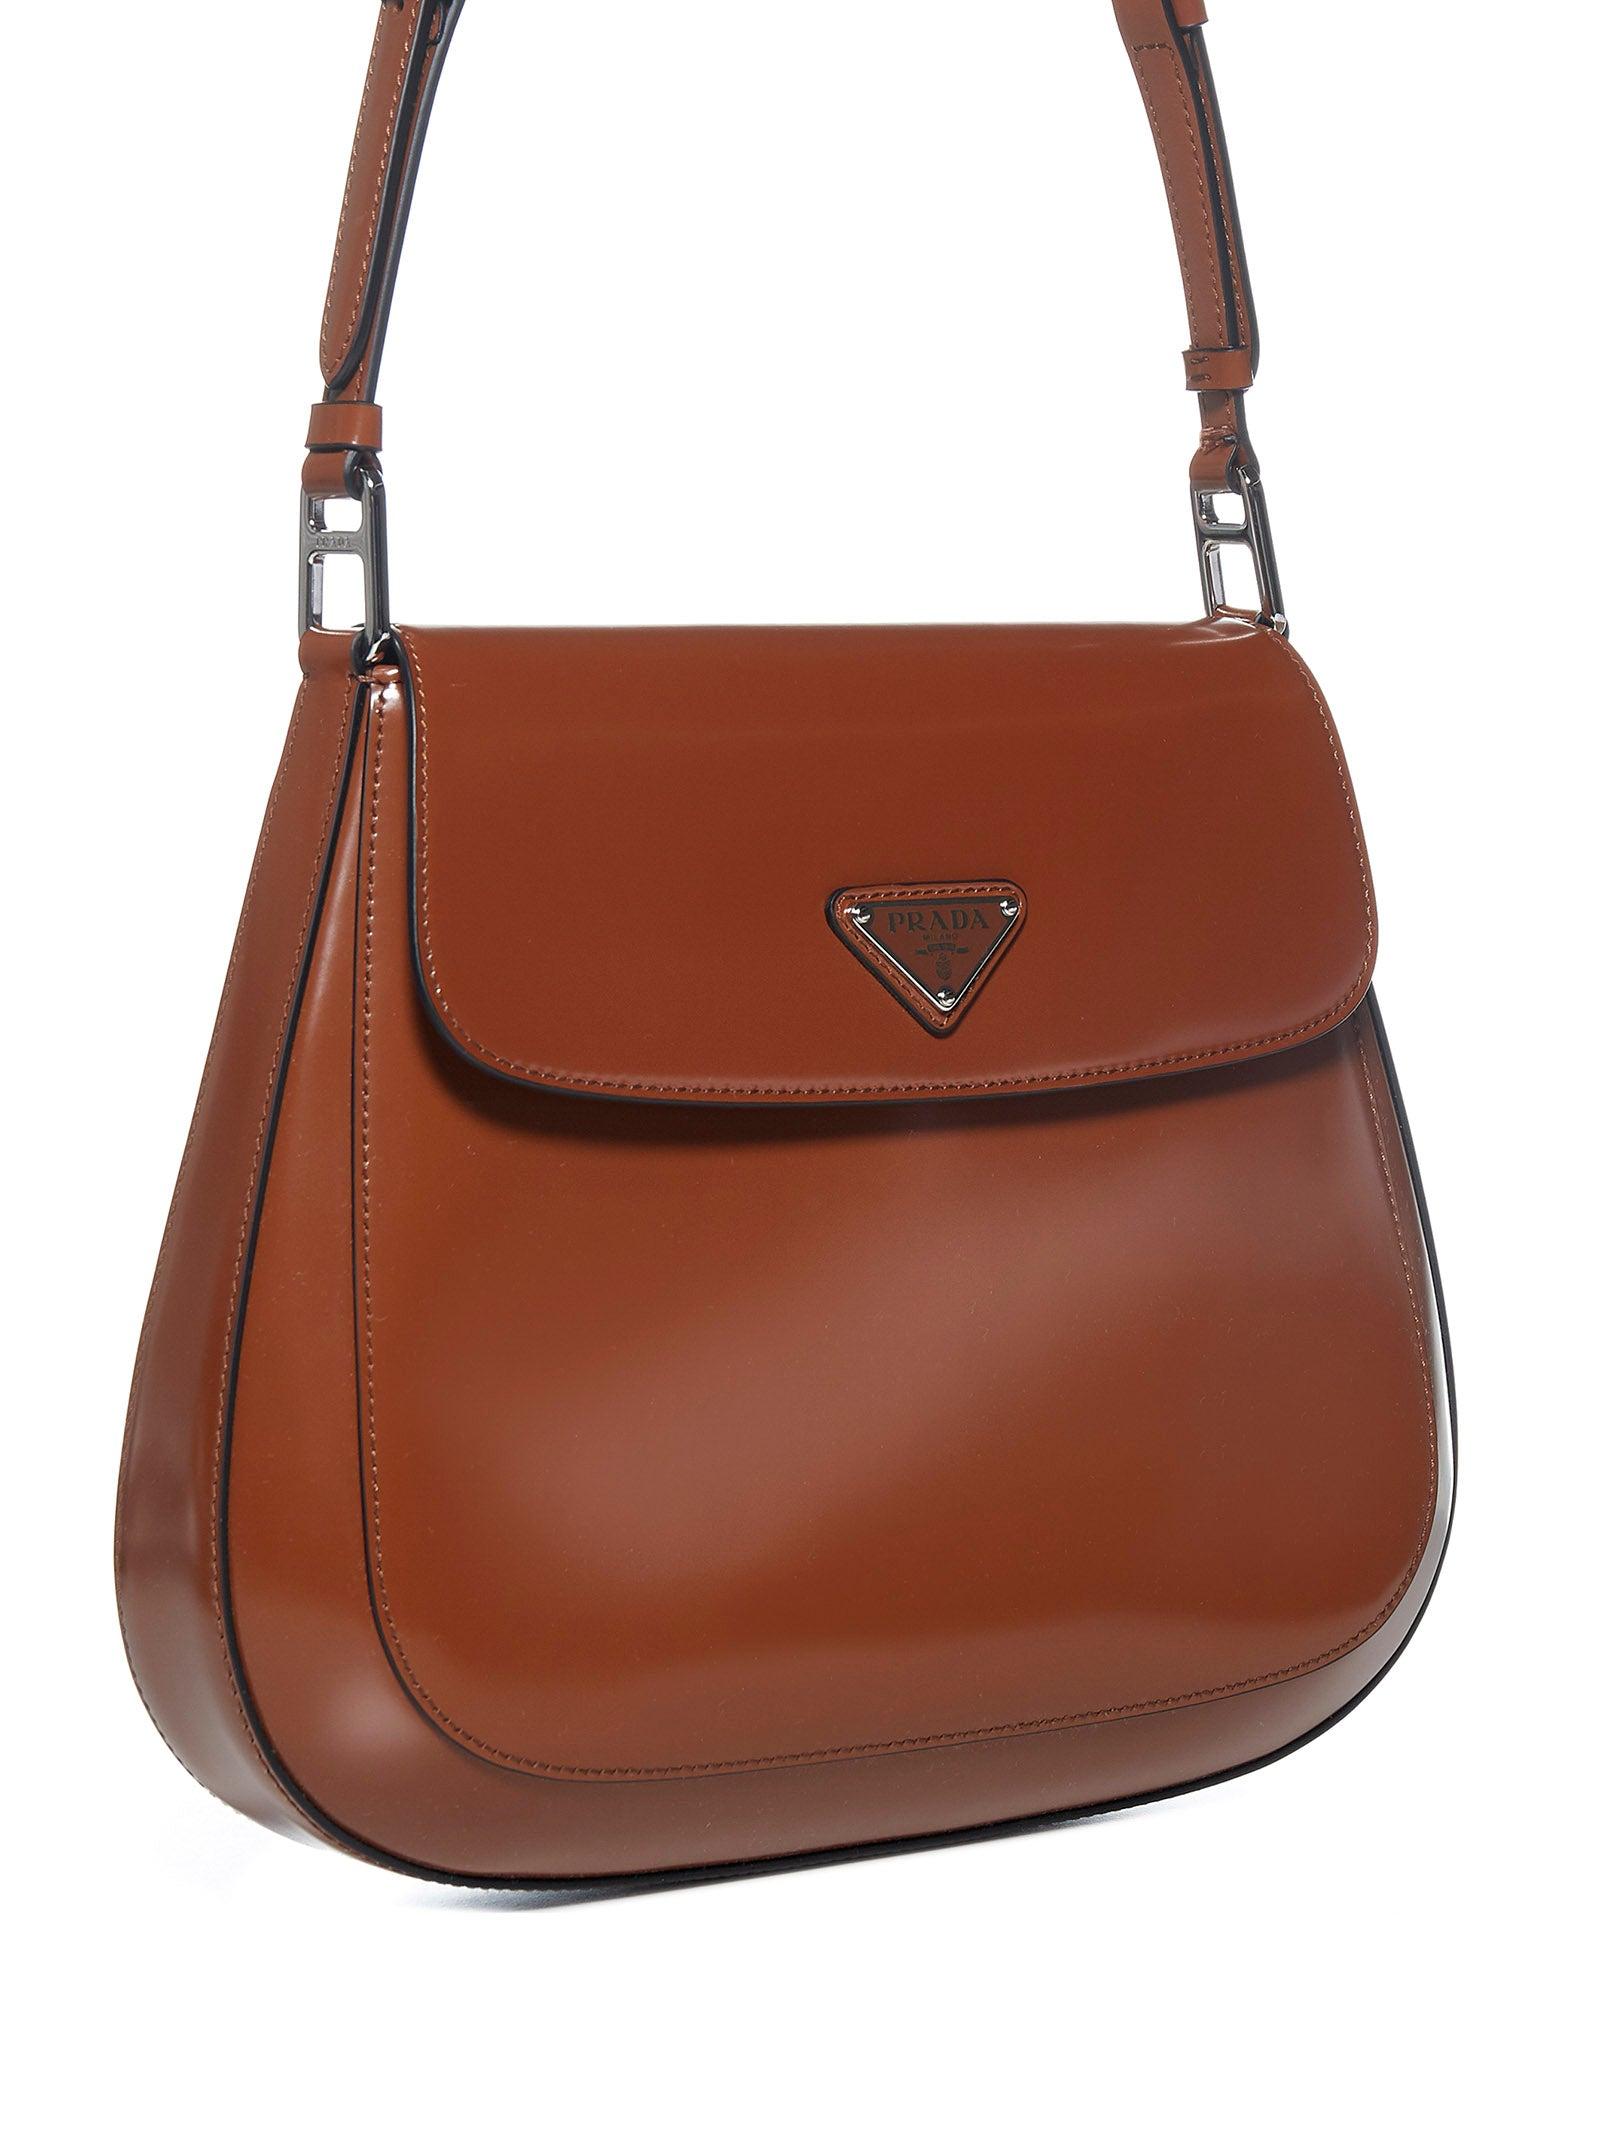 Prada Cleo Leather Bag in Brown | Lyst